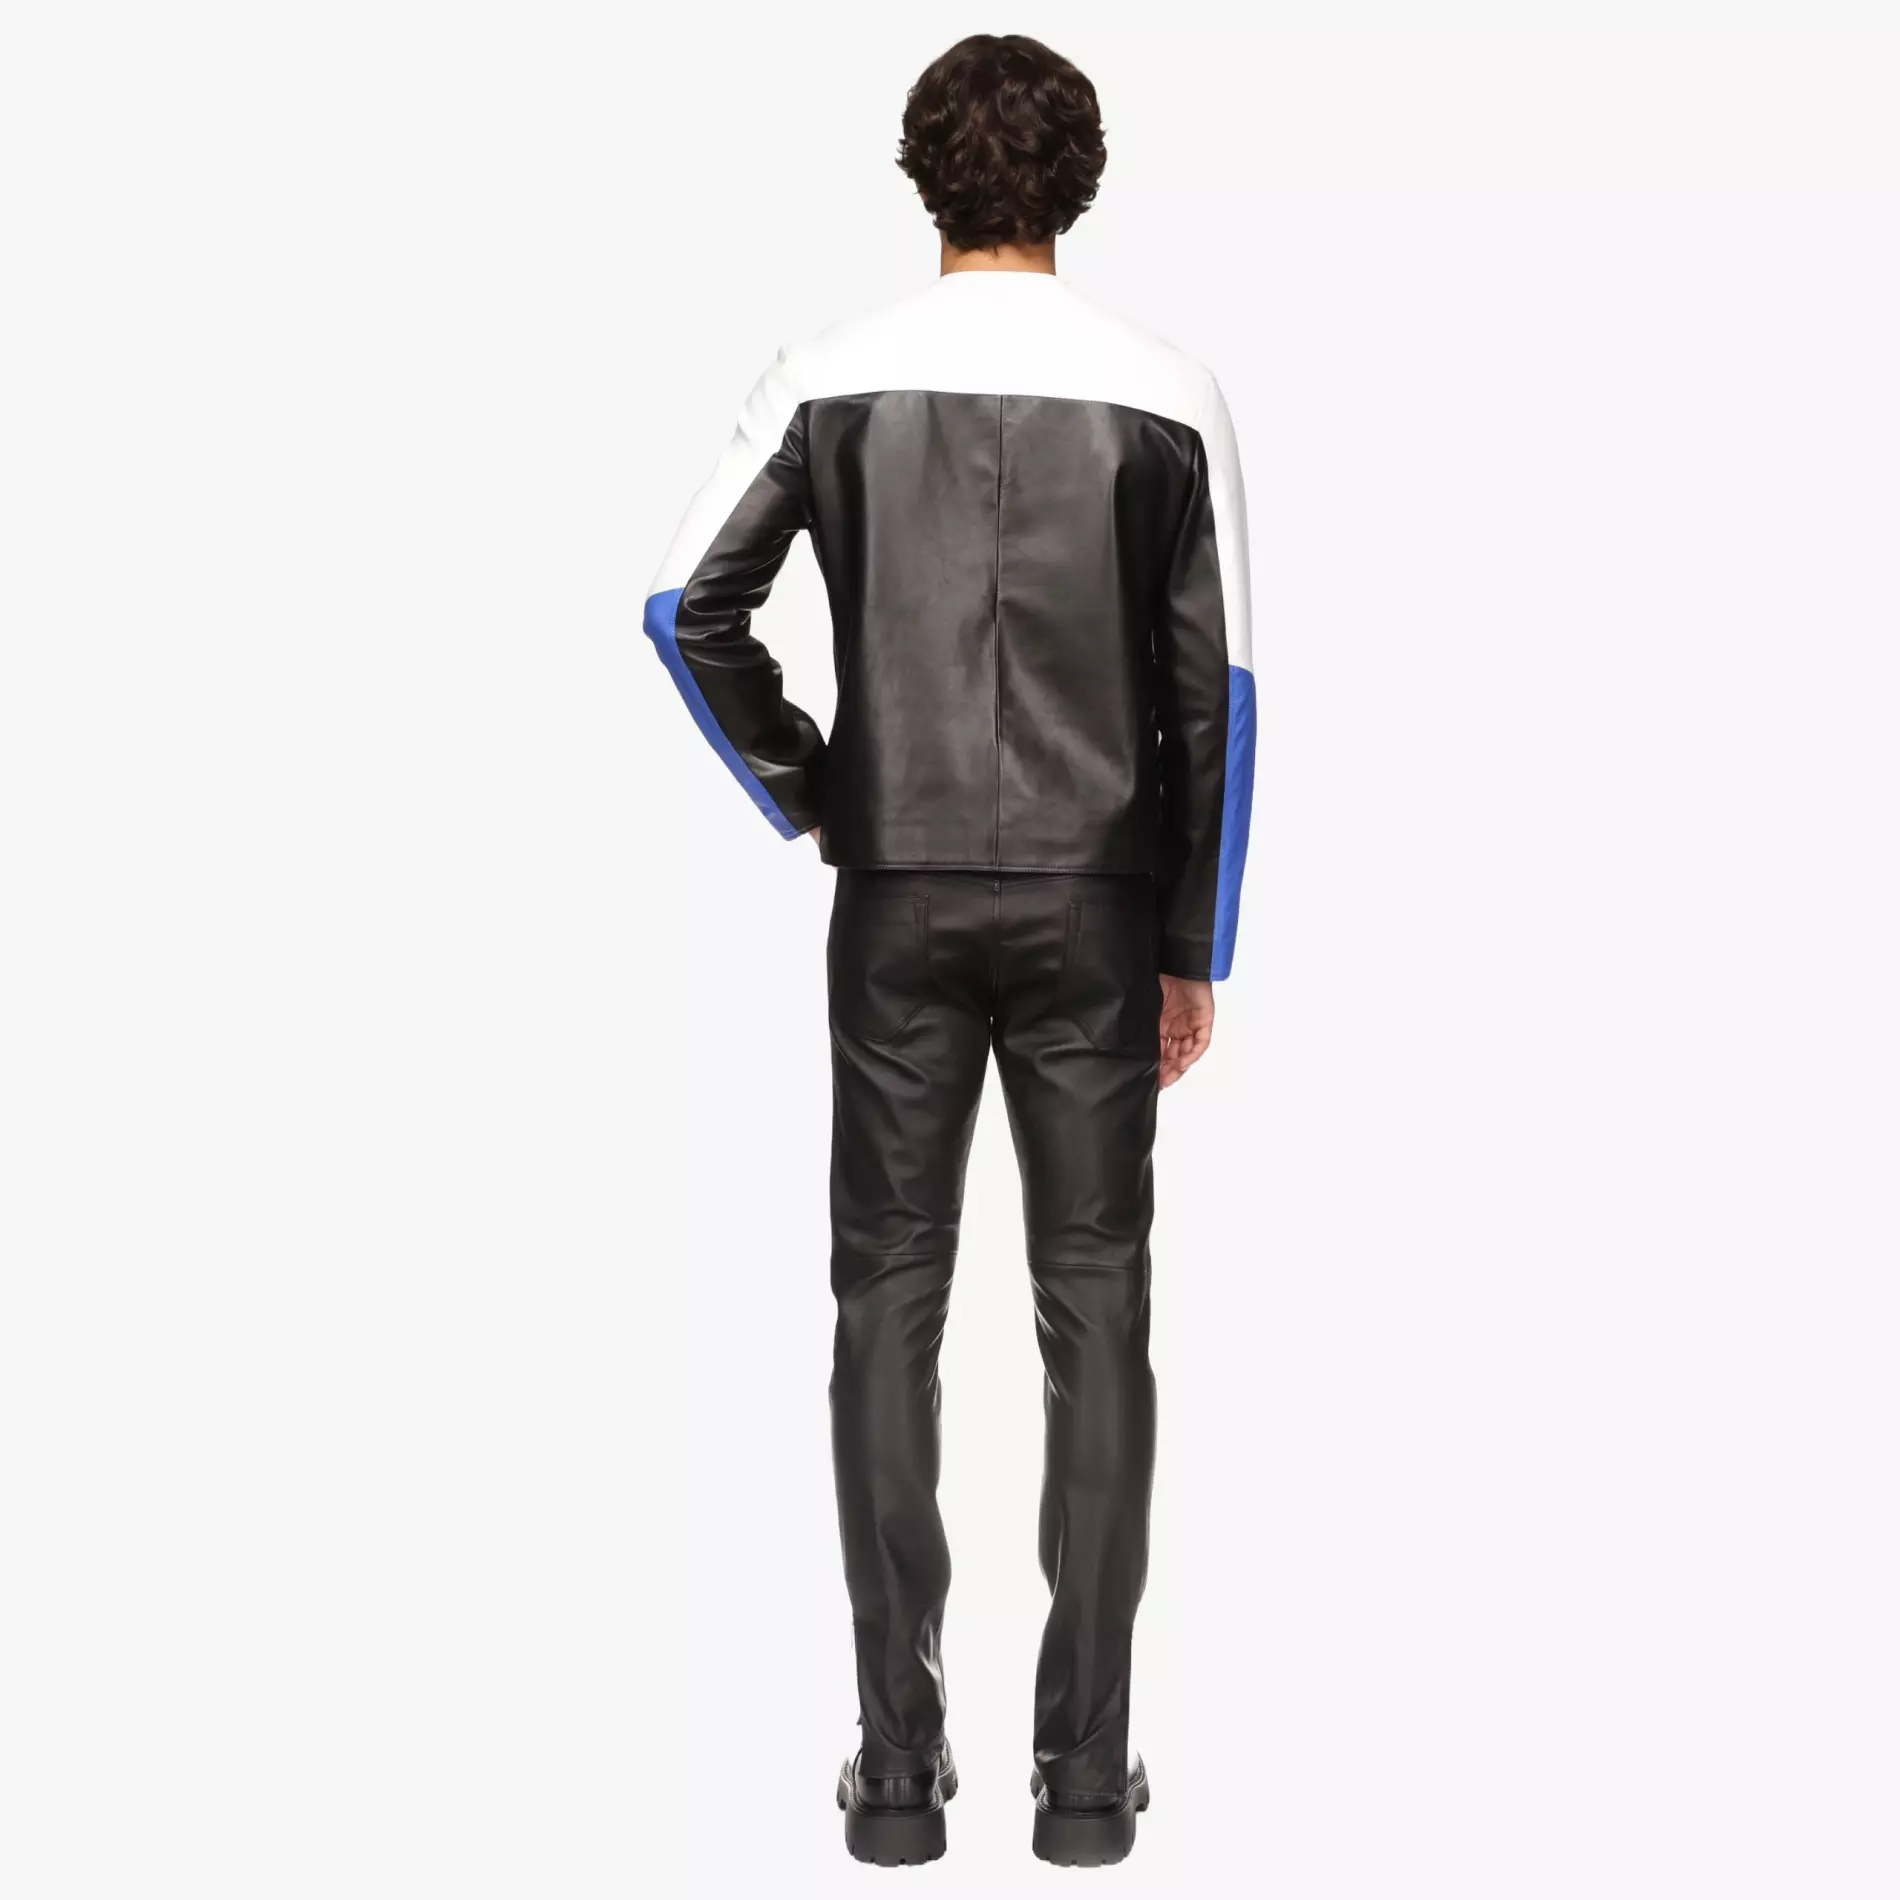 TRIUMPH Tricolor Jacket in black and blue leather - back